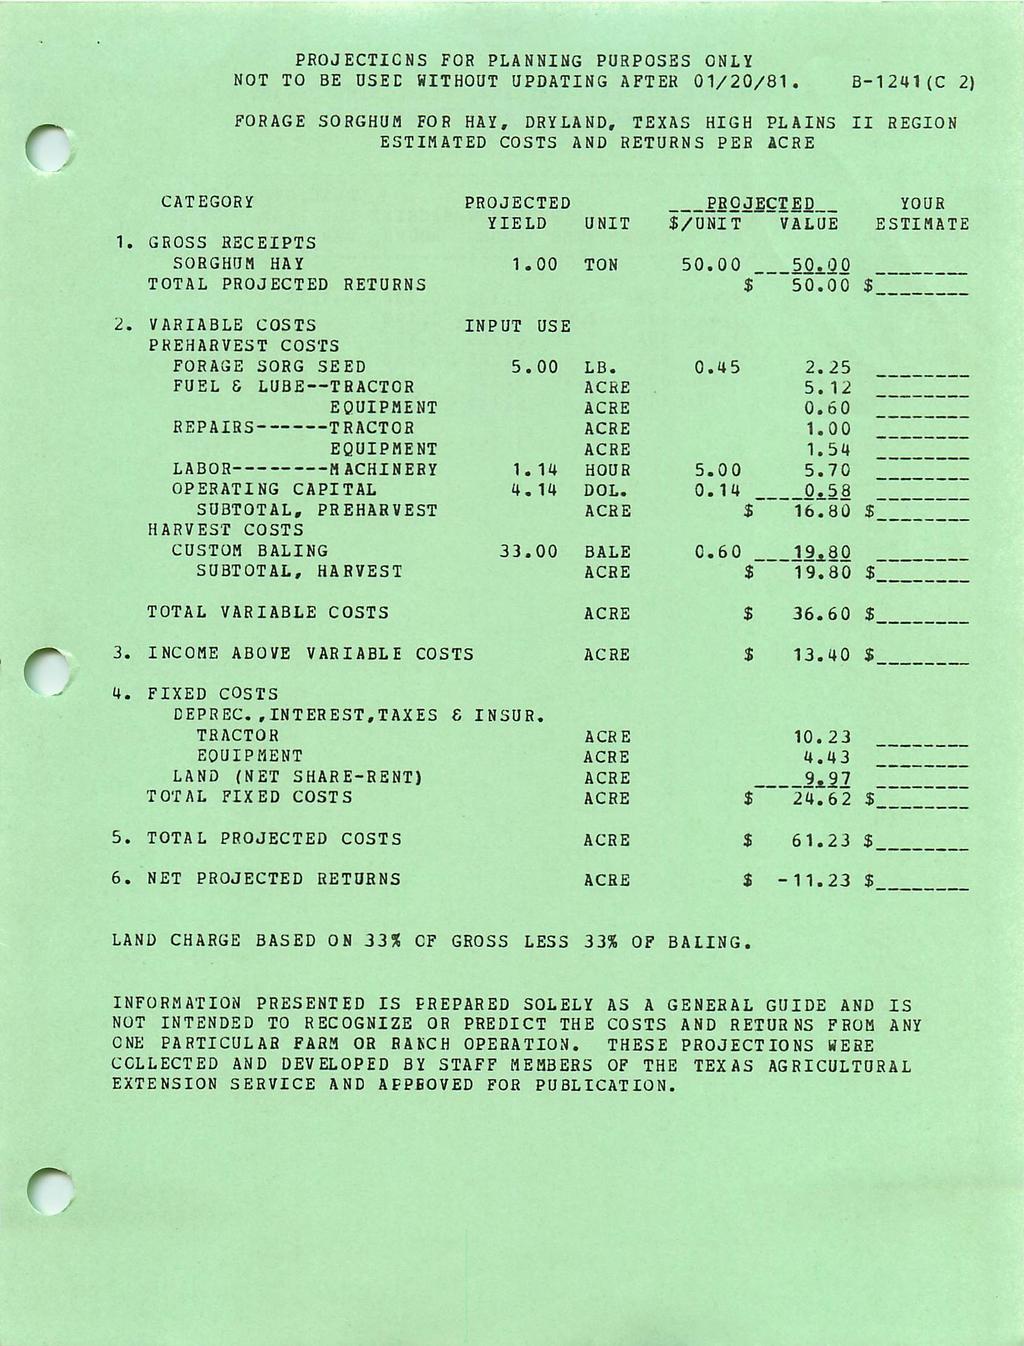 PROJECTIONS FOR PLANNING PURPOSES ONLY NOT TO BE USED WITHOUT UPDATING AFTER 01/20/81 B1241 (C 2) FORAGE SORGHUM FOR HAY, DRYLAND, TEXAS HIGH PLAINS II REGION ESTIMATED COSTS AND RETURNS PER CATEGORY